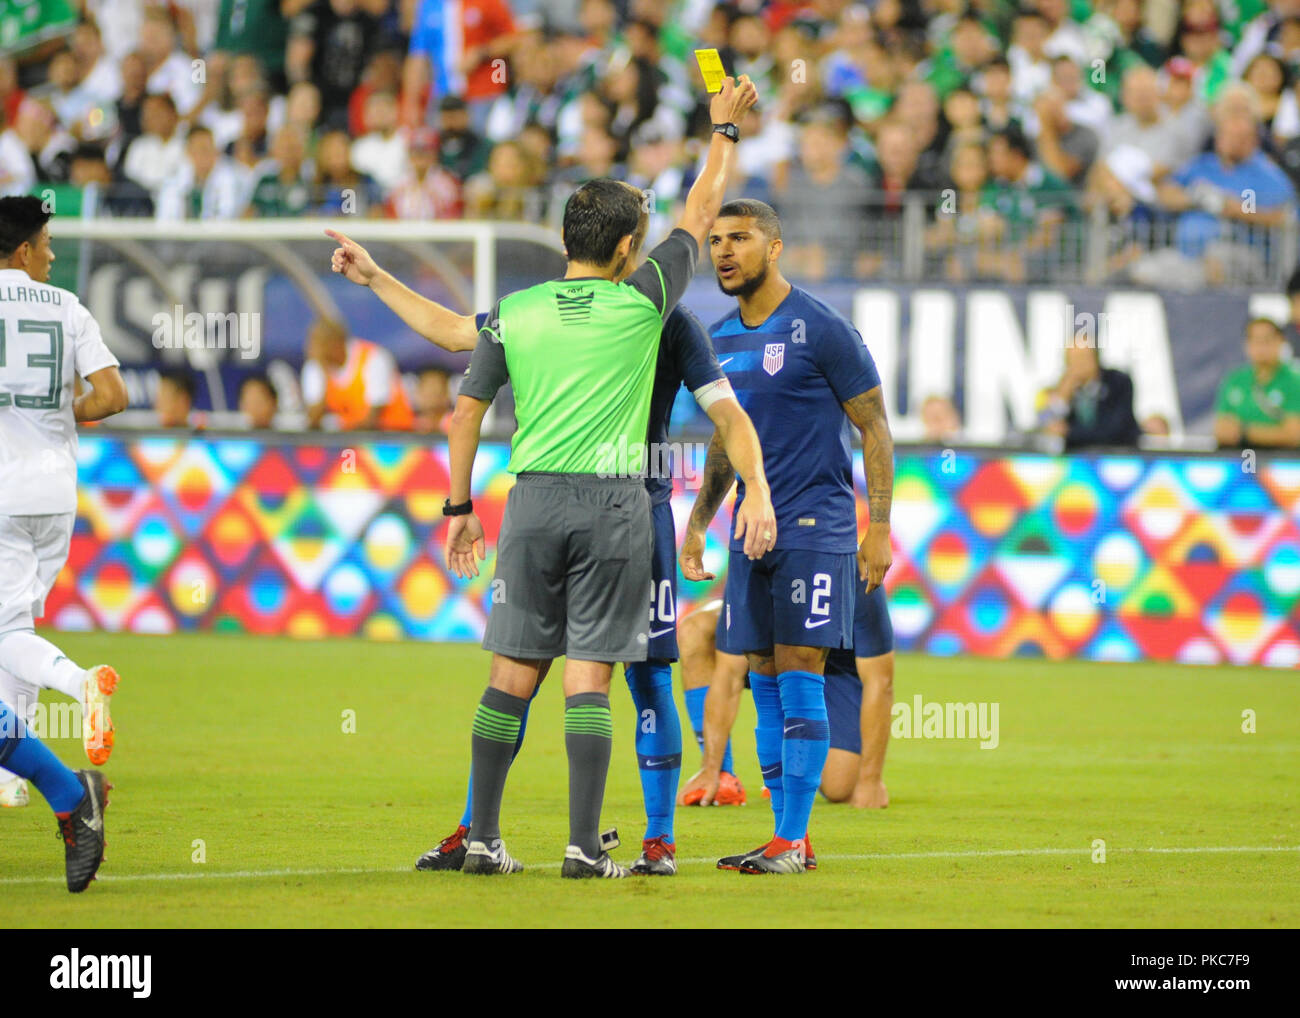 Nashville, TN, USA. 11th Sep, 2018. US defender, DeAndre Yedlin (2), argues with the referee after receiving a yellow card during the International Friendly match between Mexico and USA at Nissan Stadium in Nashville, TN. The US National team defeated Mexico, 1-0. Kevin Langley/CSM/Alamy Live News Stock Photo